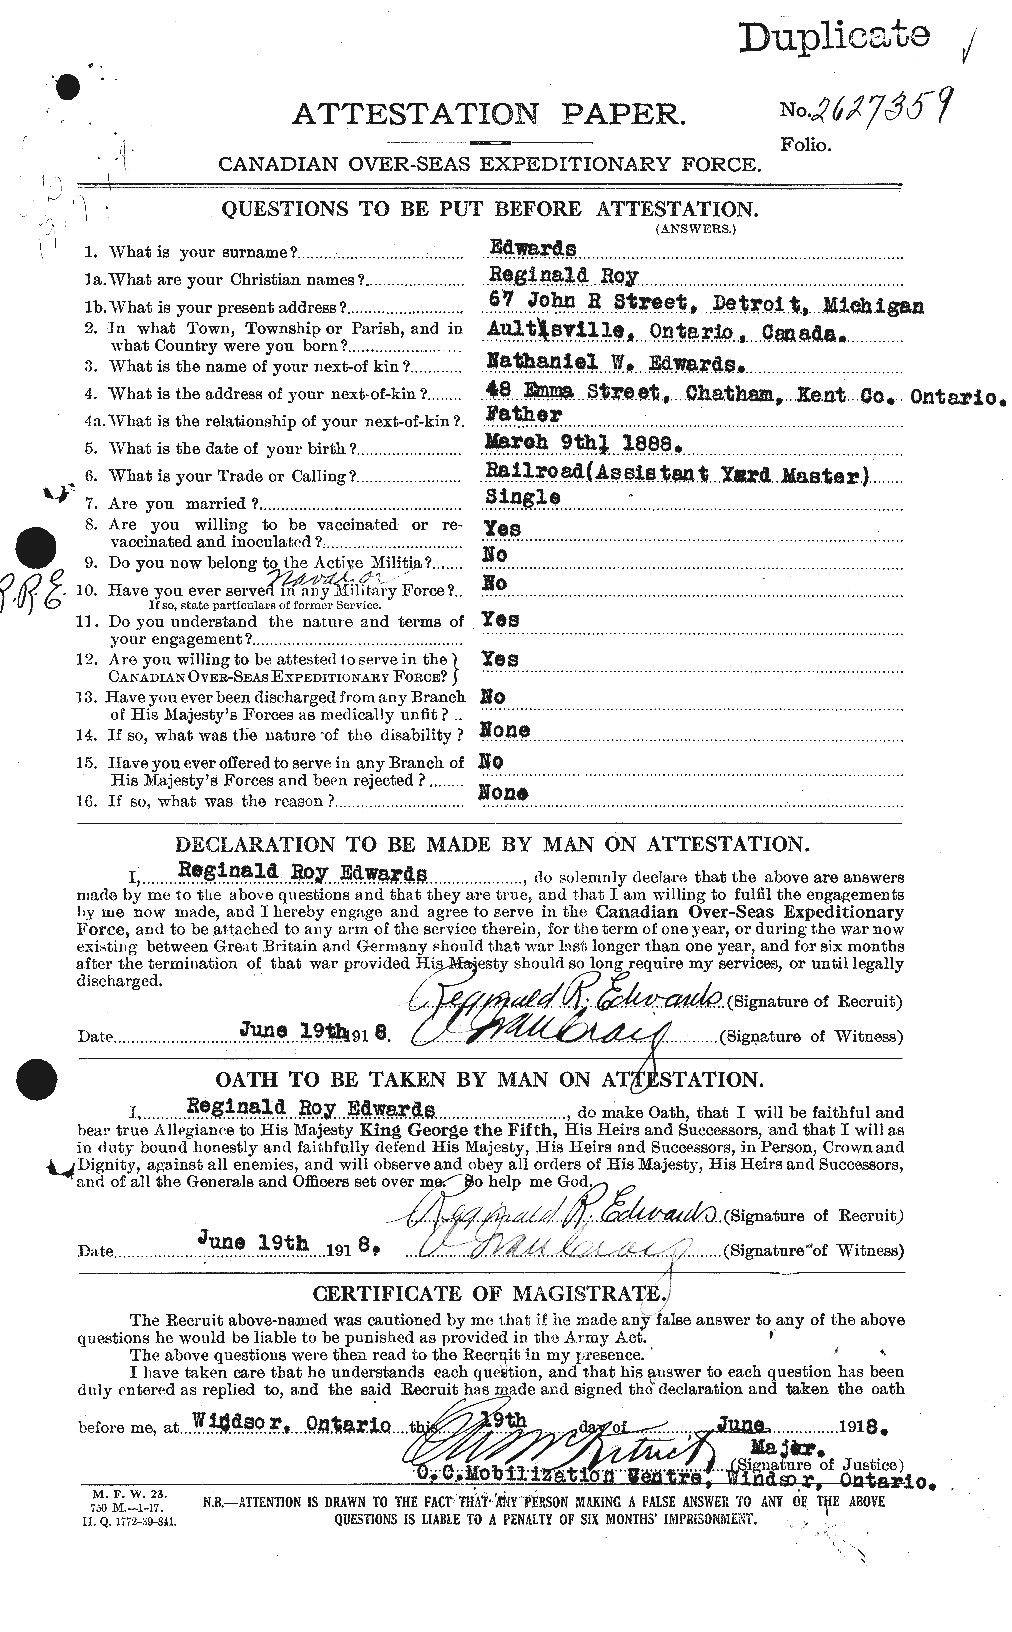 Personnel Records of the First World War - CEF 310250a